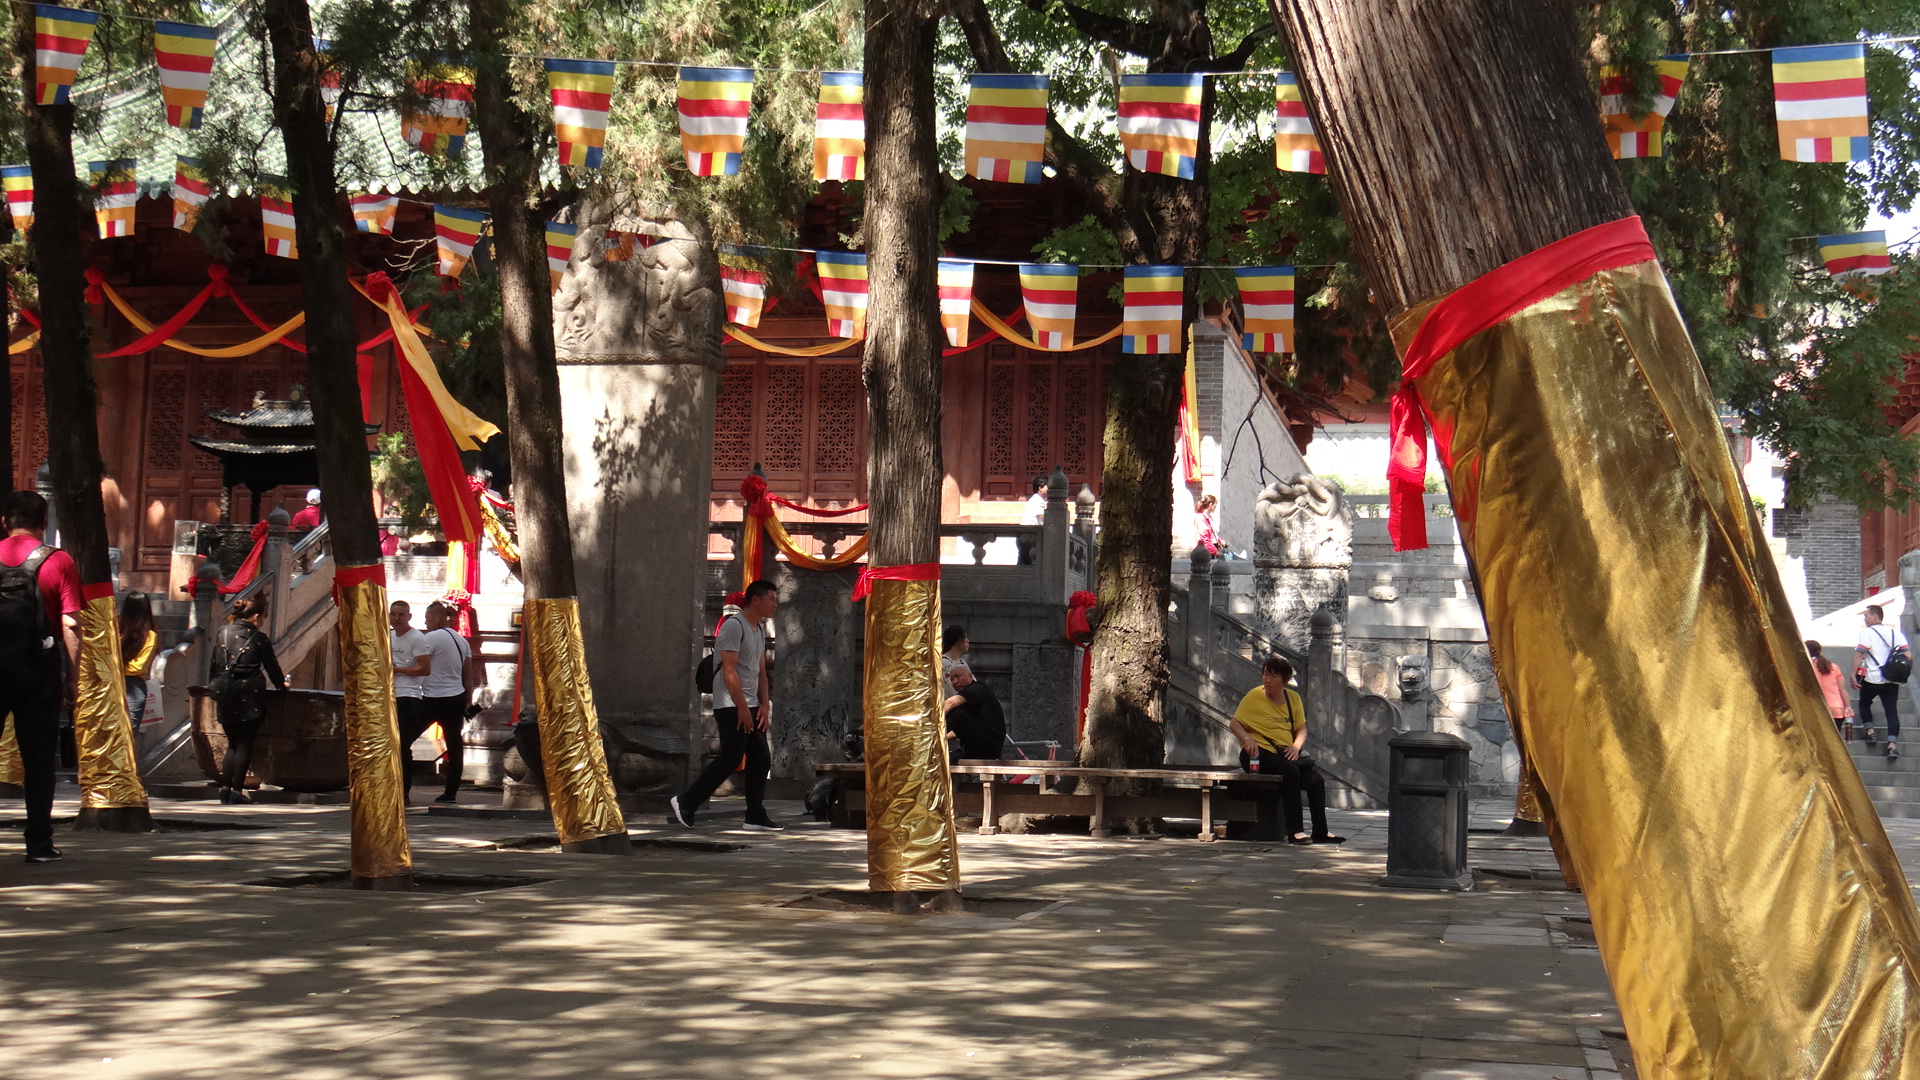 Shaolin Temple in Luoyang